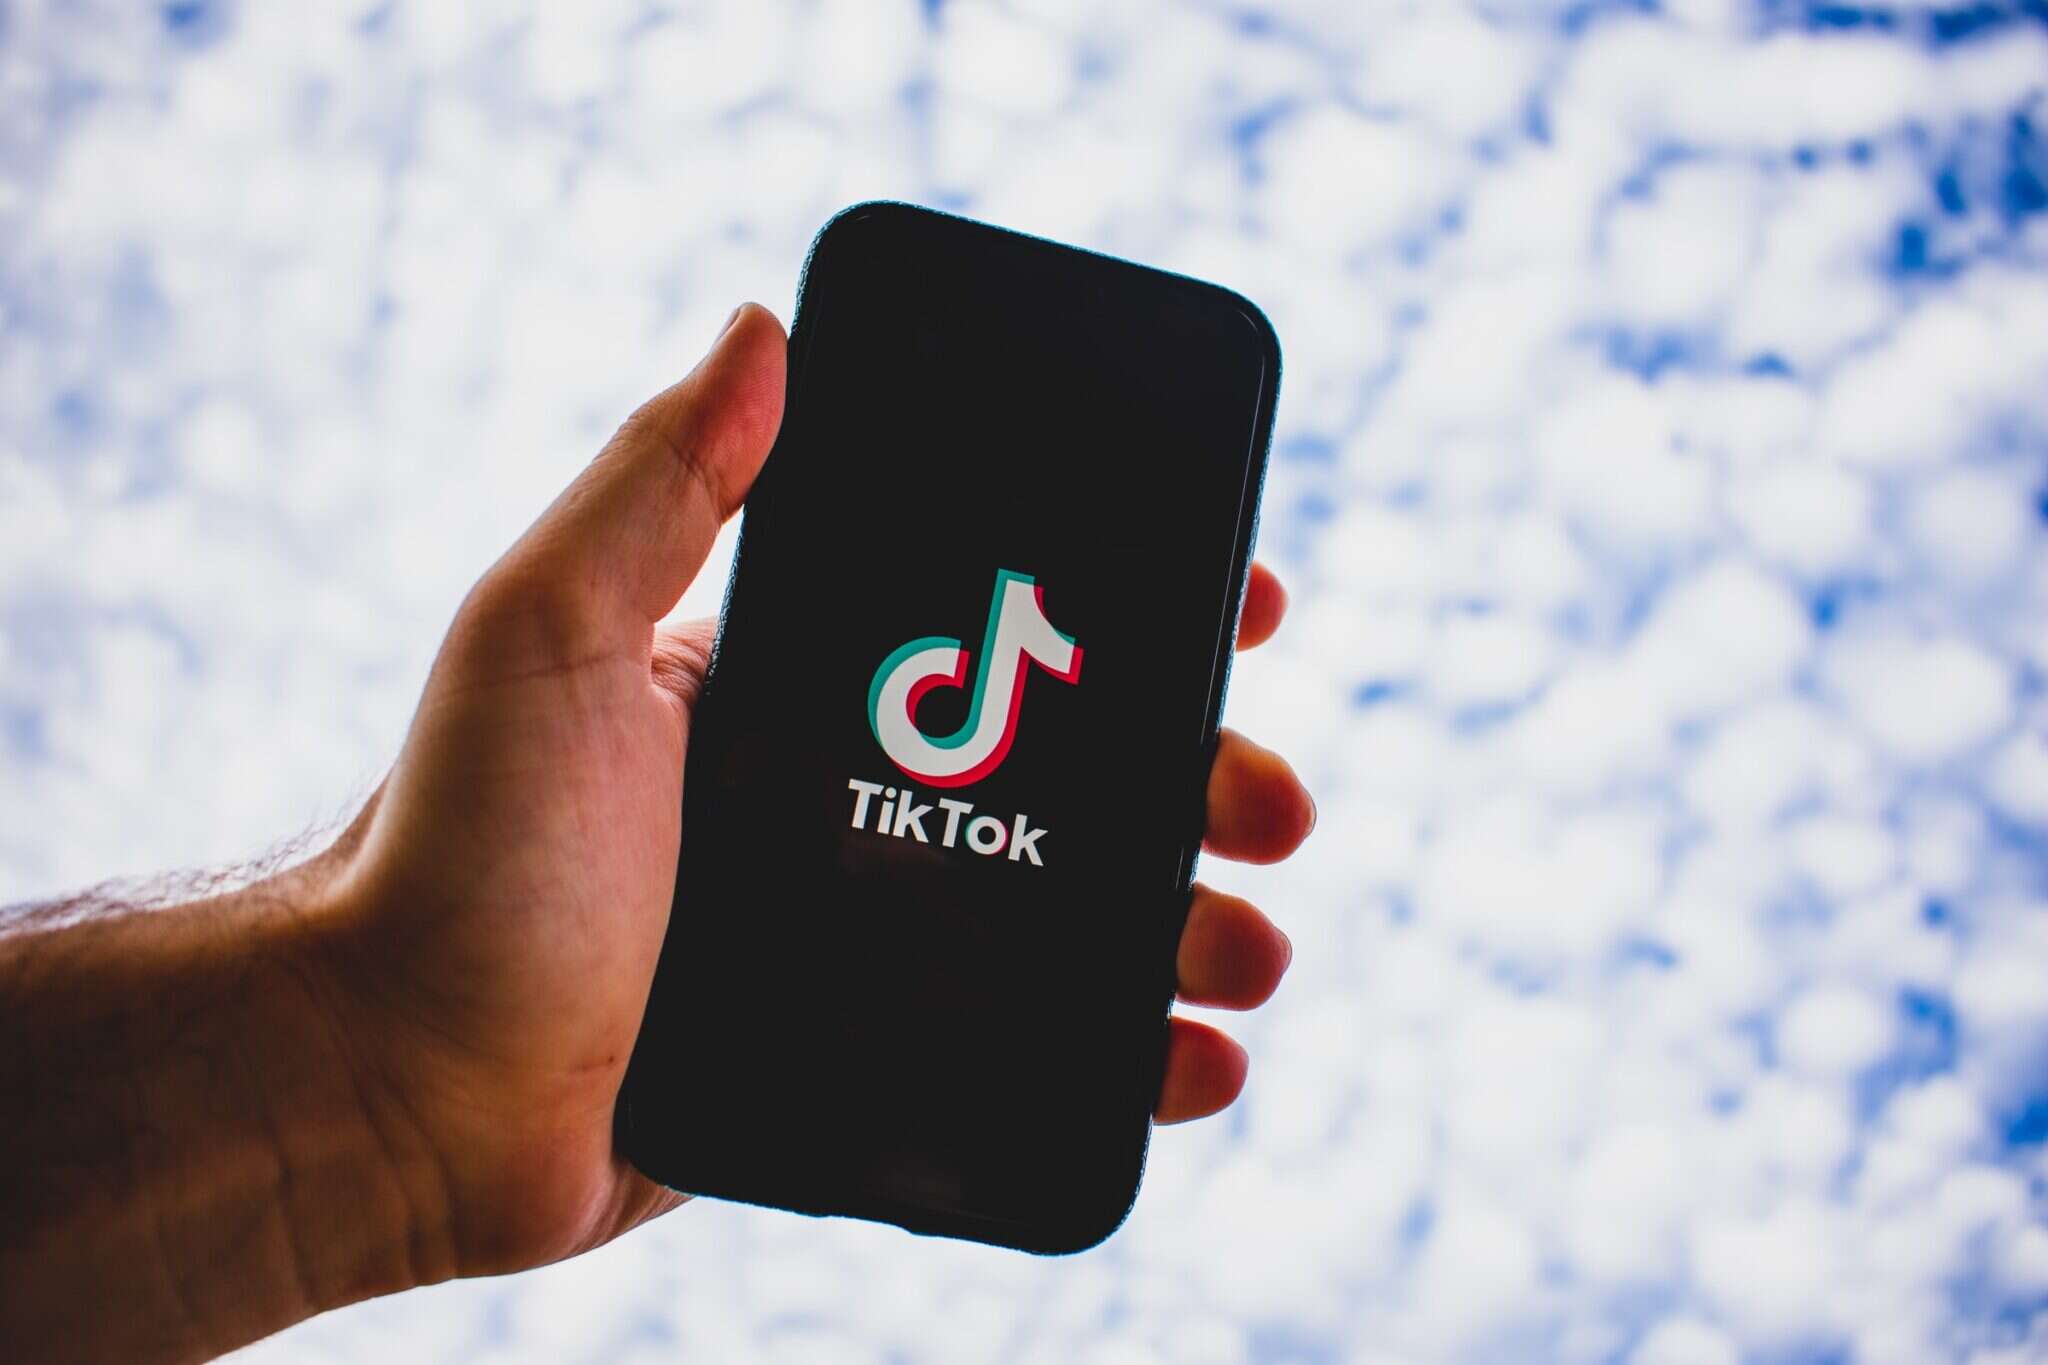 Microsoft in Talks to Buy TikTok in Four of Five Eyes Nations - UK Not Included